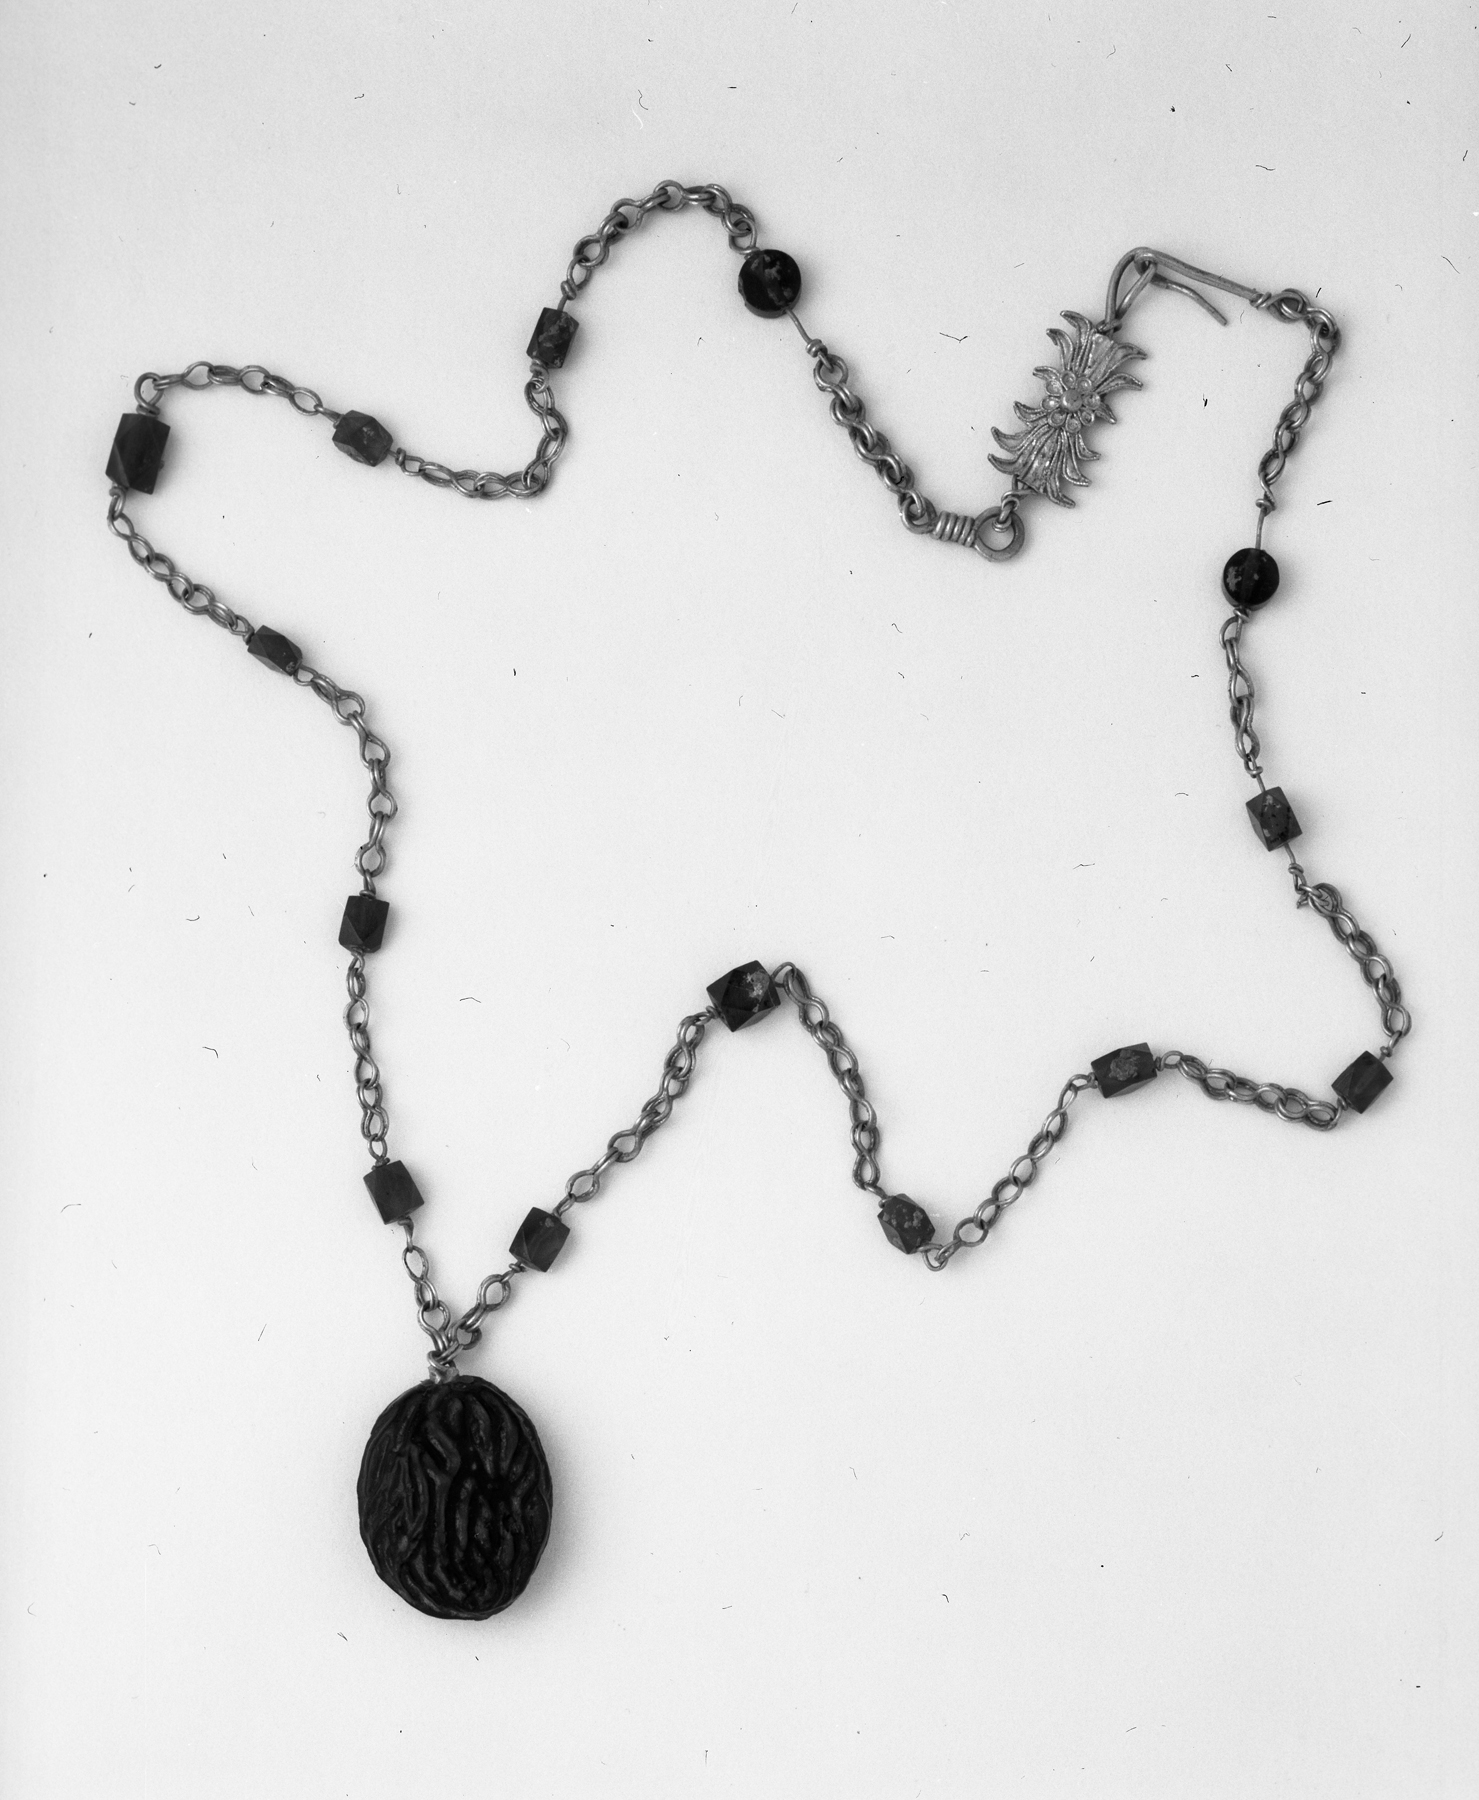 Image for Necklace with Raisin-Shaped Pendant